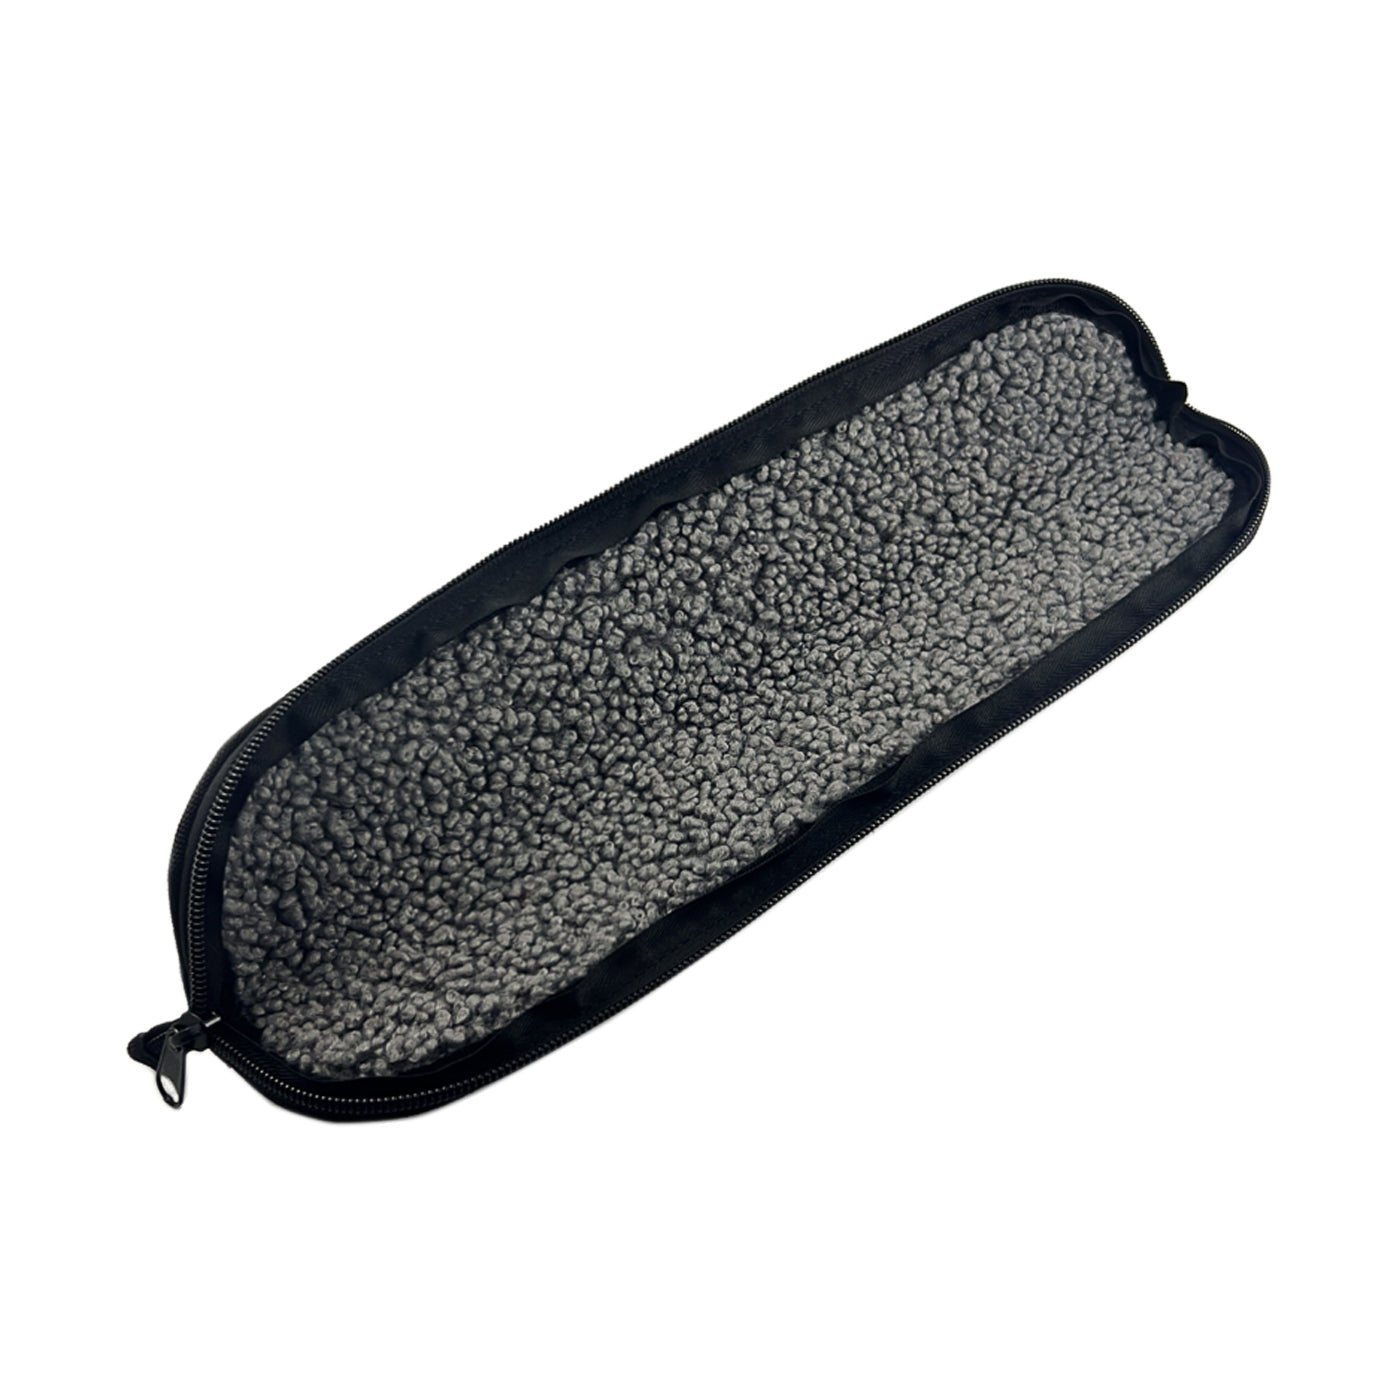 Knife Cases with Polar Interior - Cross Embroidered